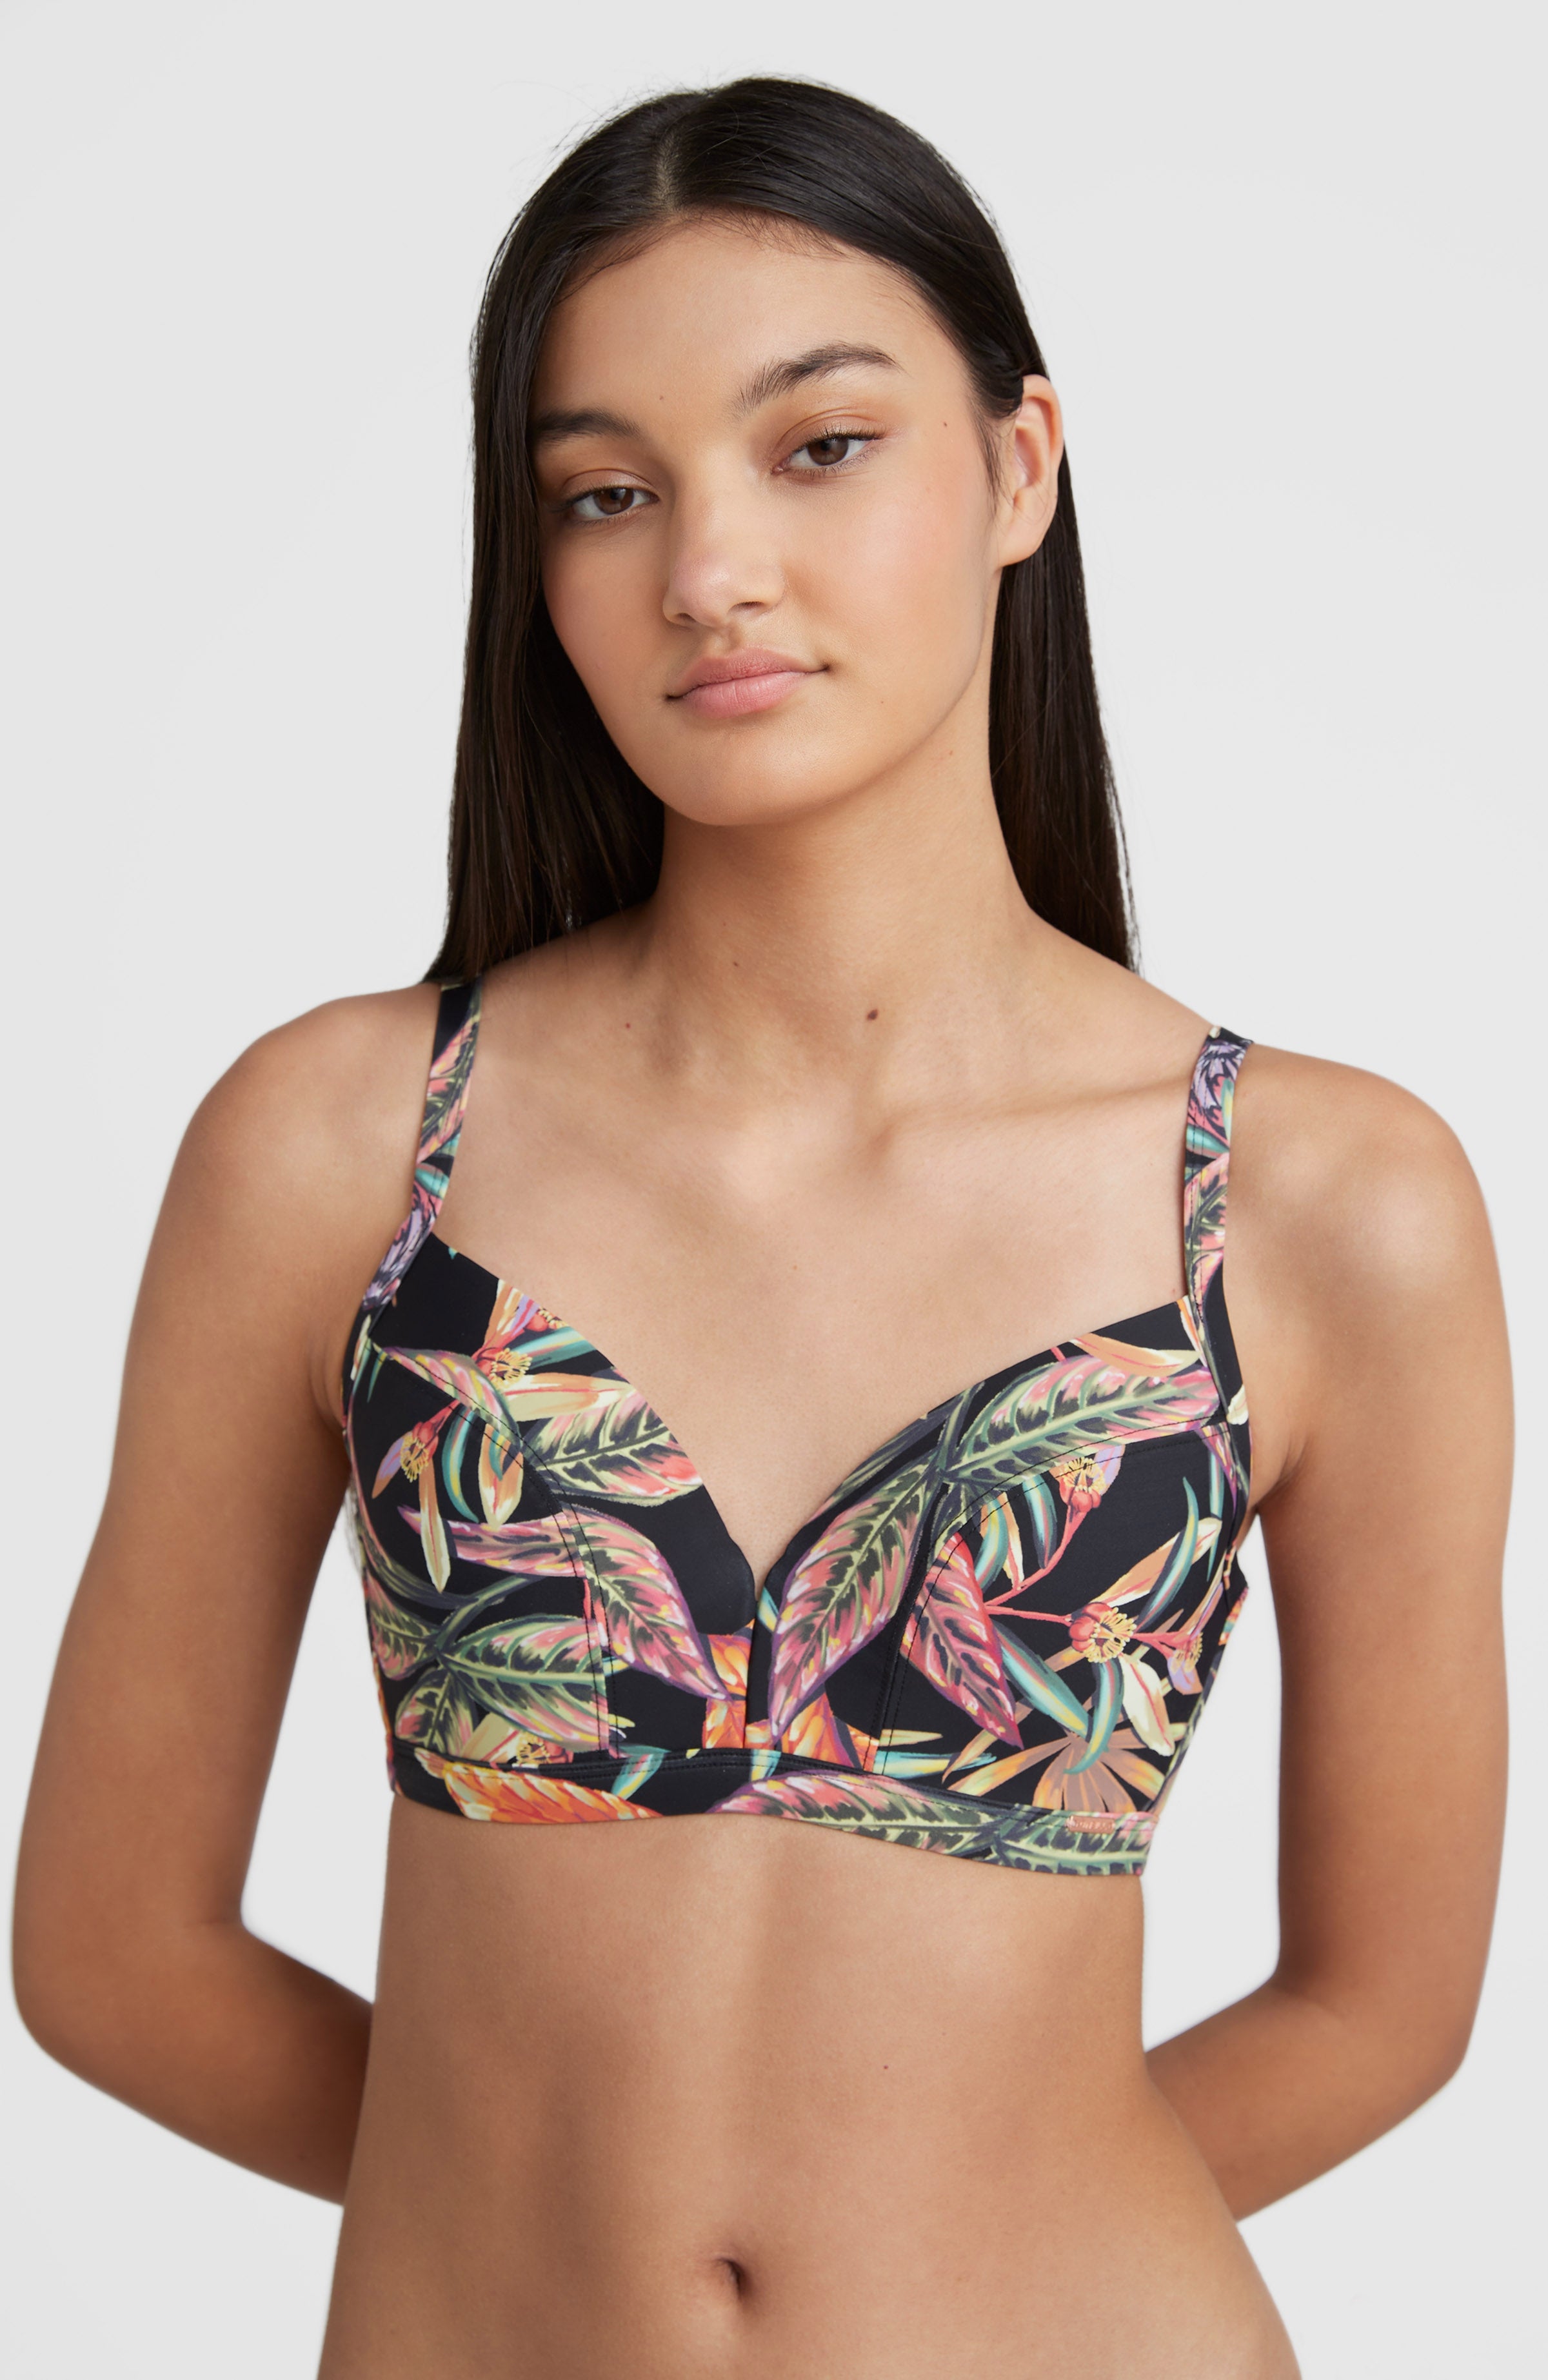 Tommy Hilfiger Bandeau Bikinis for Women sale - discounted price